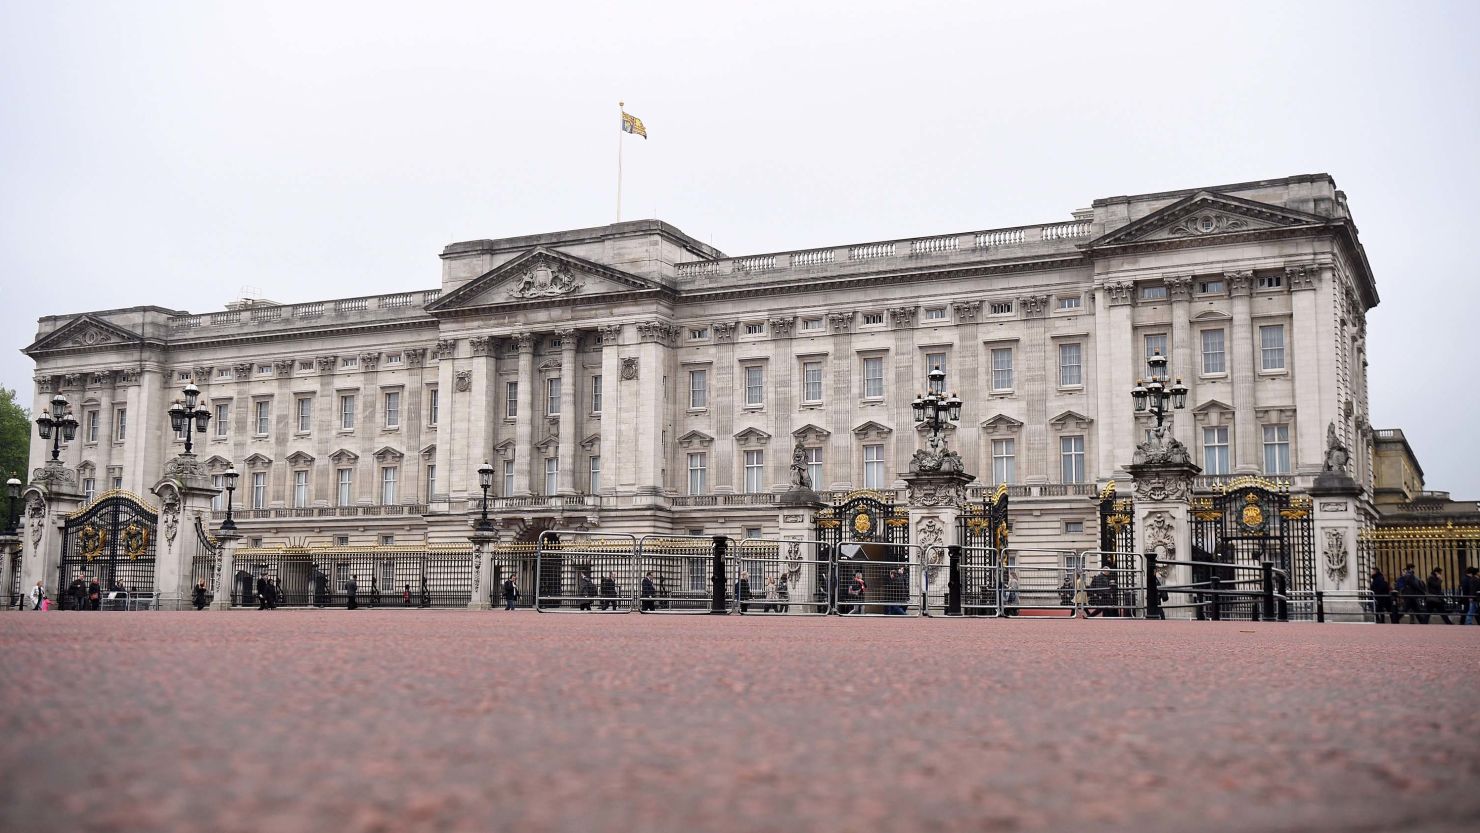 Barricades protect Buckingham Palace in London.